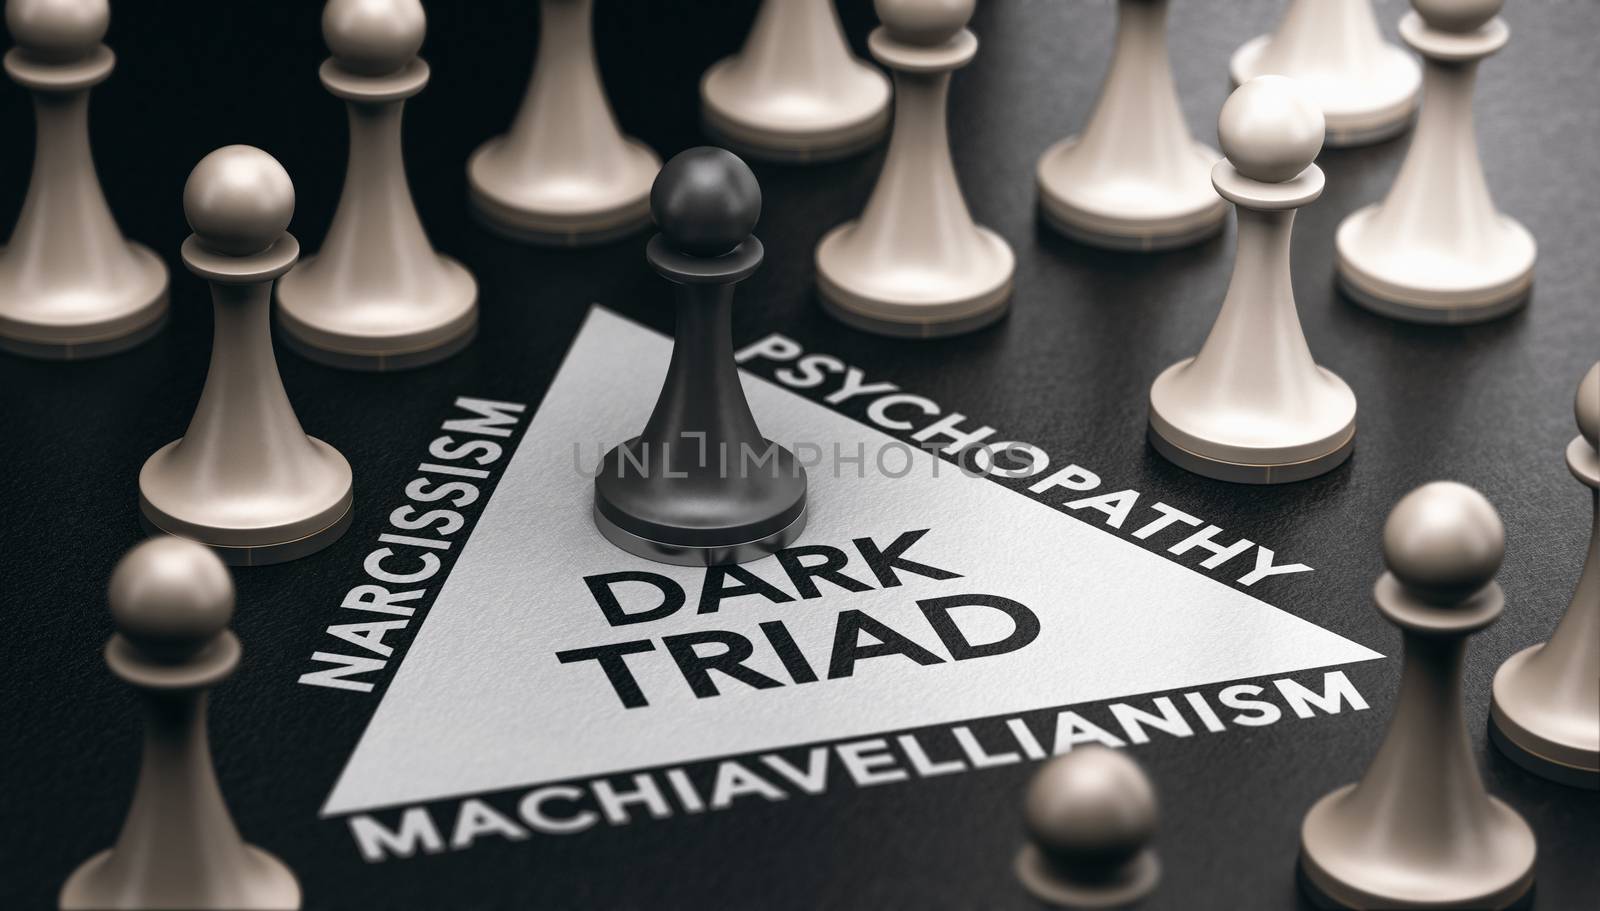 3d illustration of pawns over black background and a triangle shape with three words around it narcissism, psychopathy and machiavellianism. Psychological disorder concept. Dark triad and anti-social personality traits.